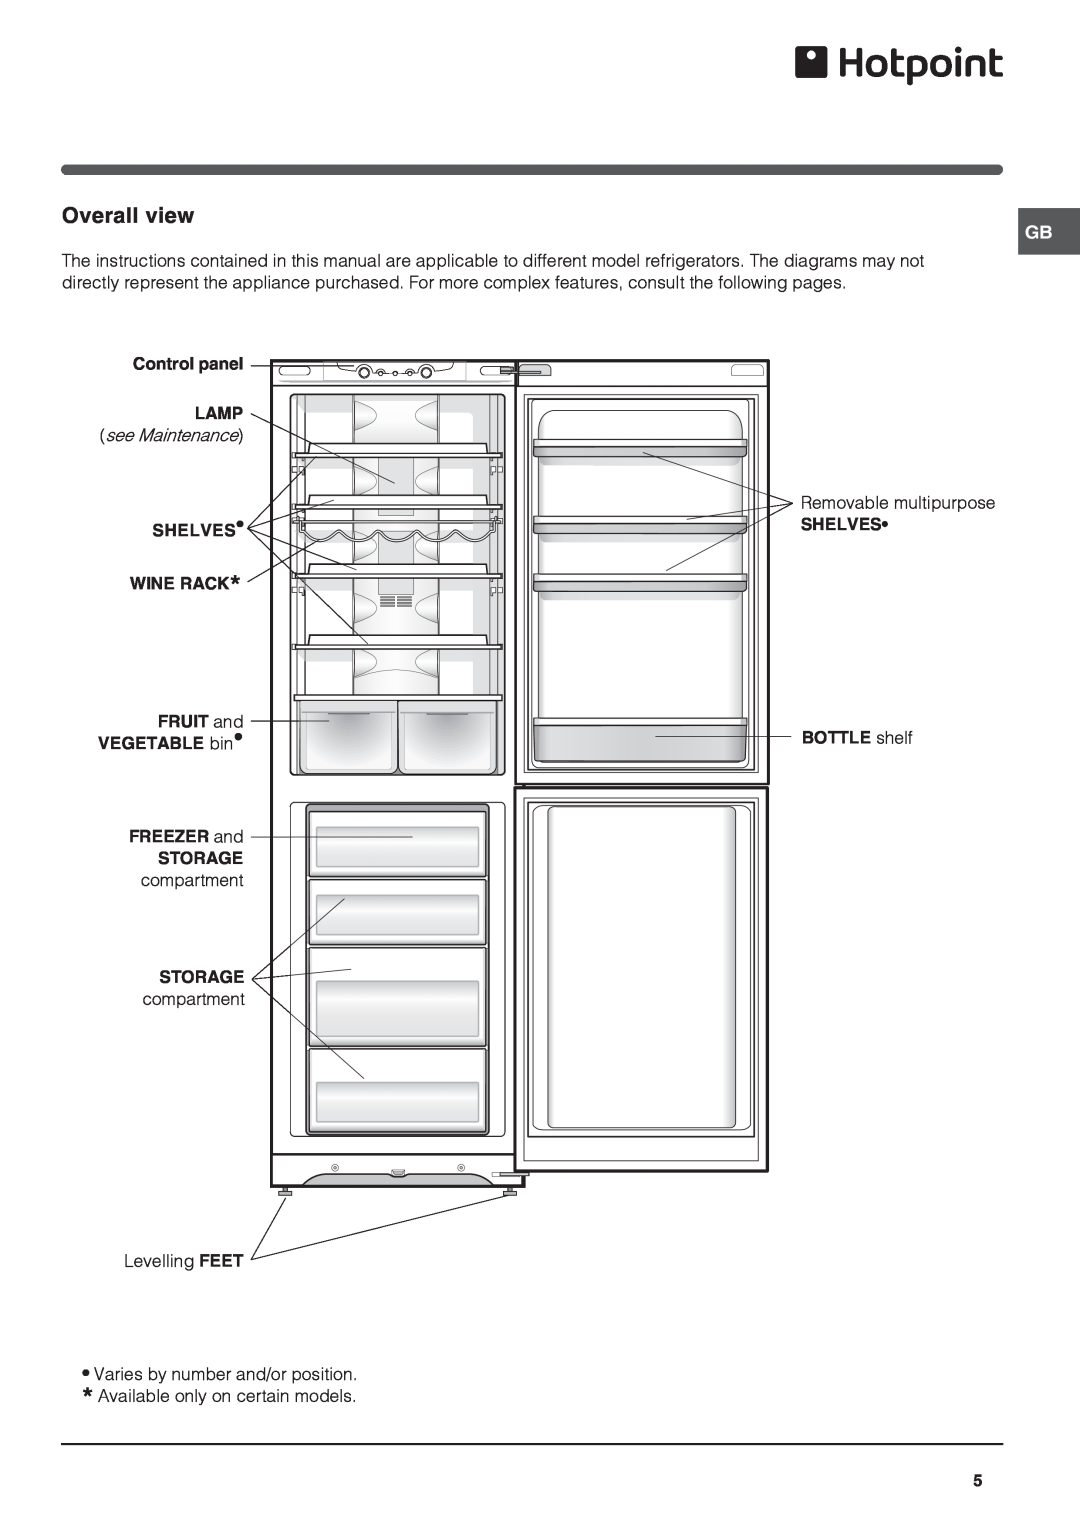 Hotpoint FF200LG manual Overall view 